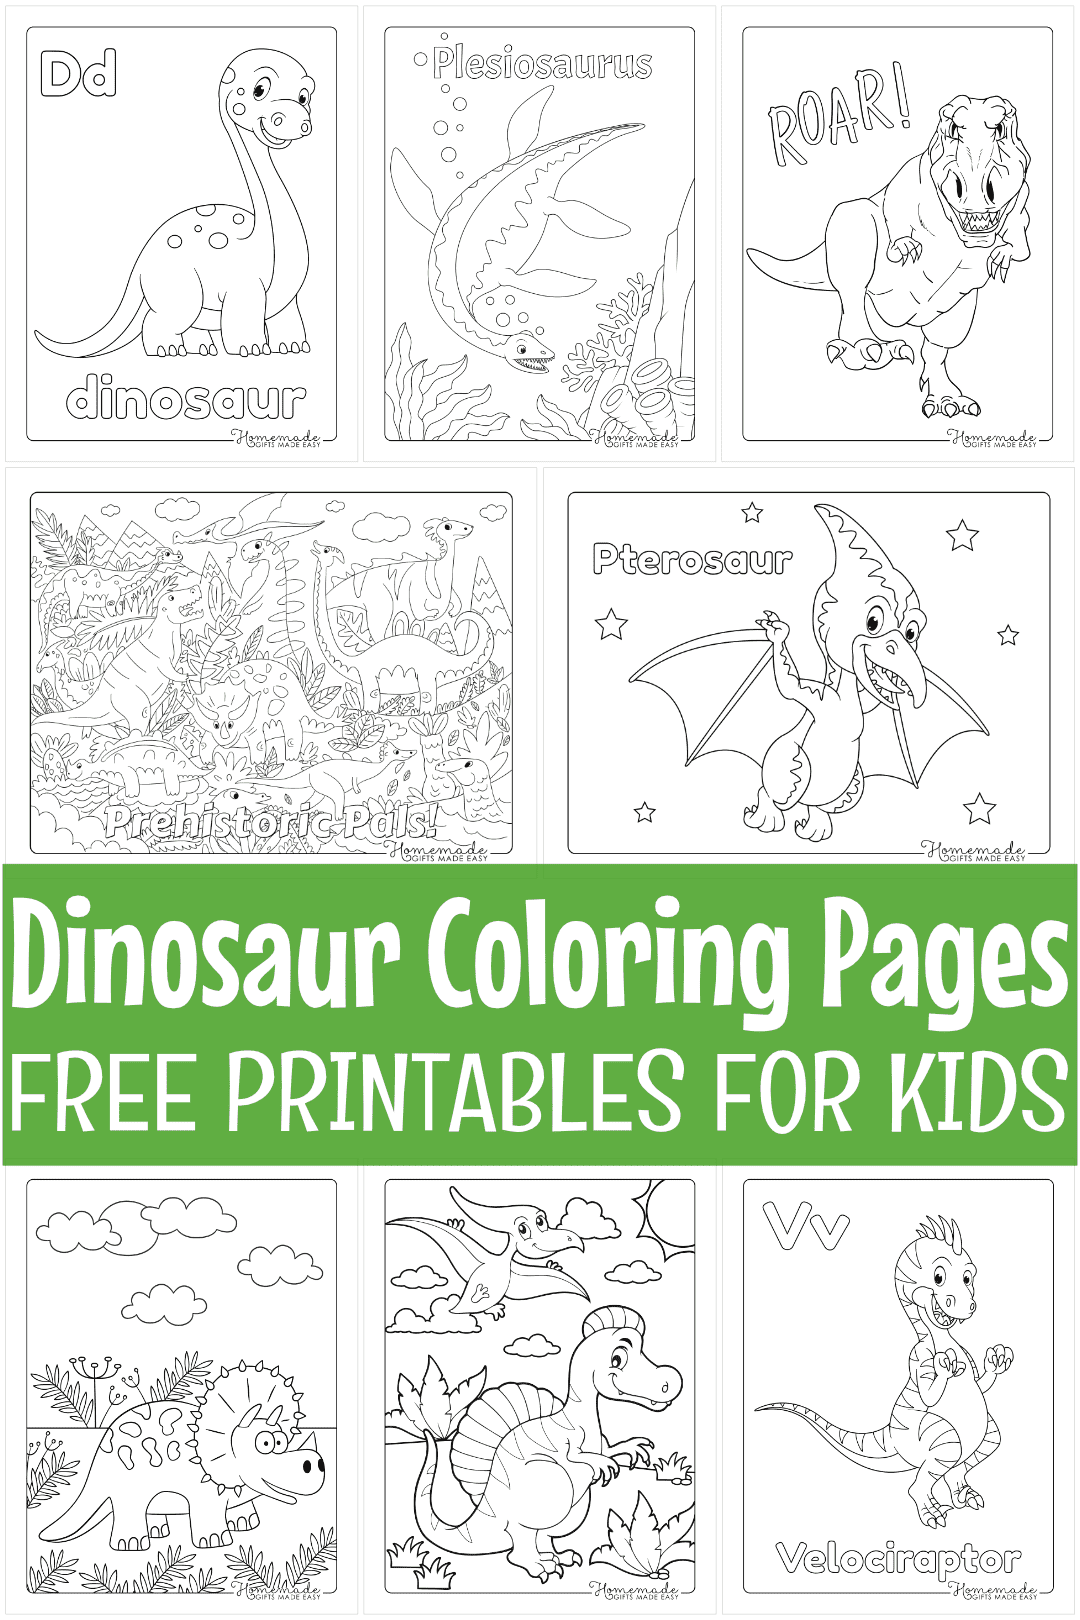 KIDS BOYS GIRLS LARGE A4 SIZE DINOSAUR COLOURING ACTIVITY  BOOK BOOKS BRAND NEW 